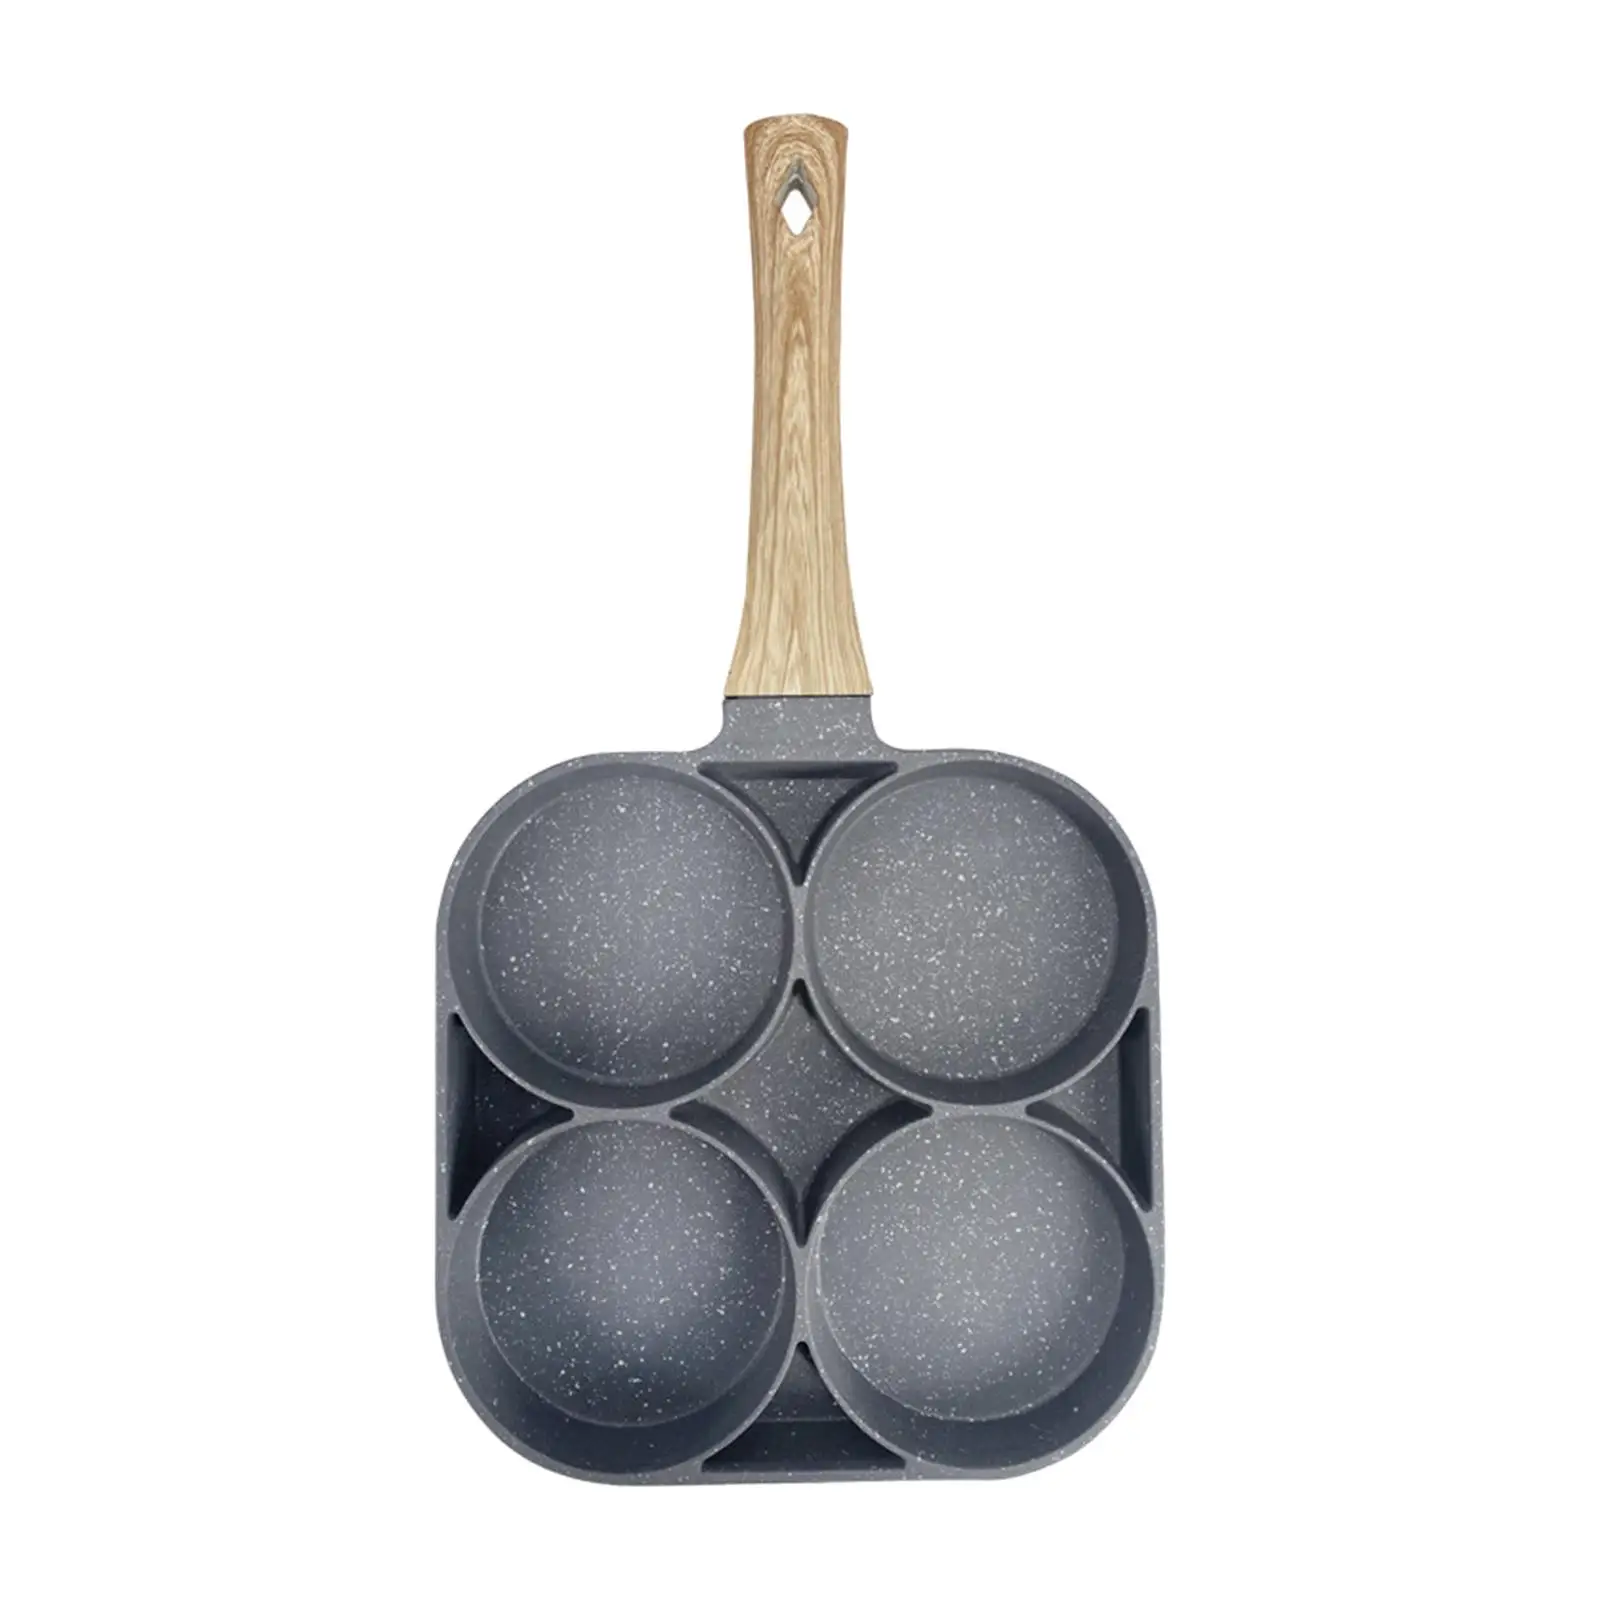 Fried Egg Pan with Removable Anti Scald Handle Frying Pan for Breakfast